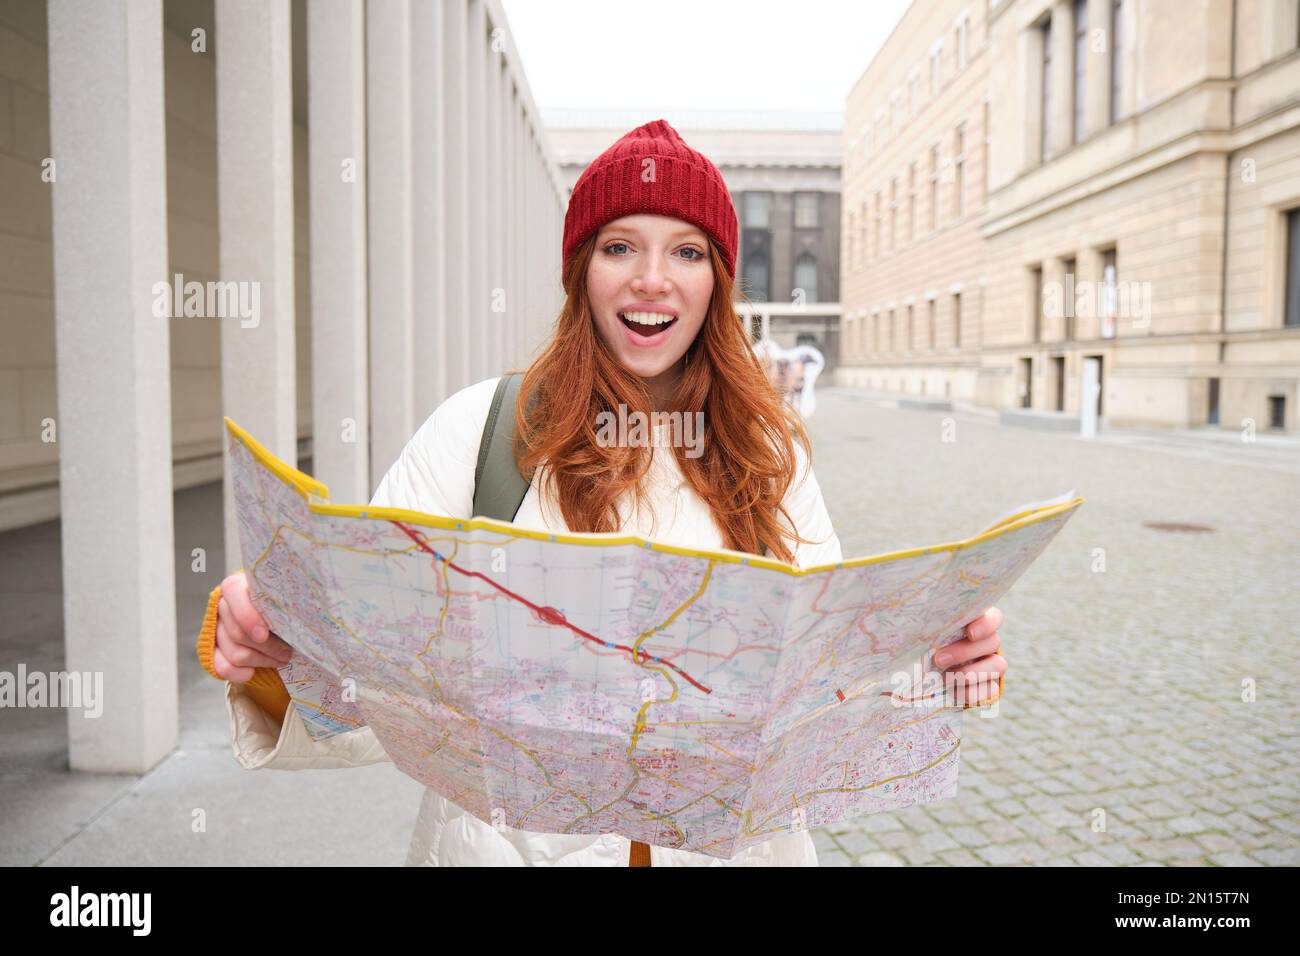 Beautiful redhead woman, tourist with city map, explores sightseeing historical landmark, walking around old town, smiling happily. Stock Photo